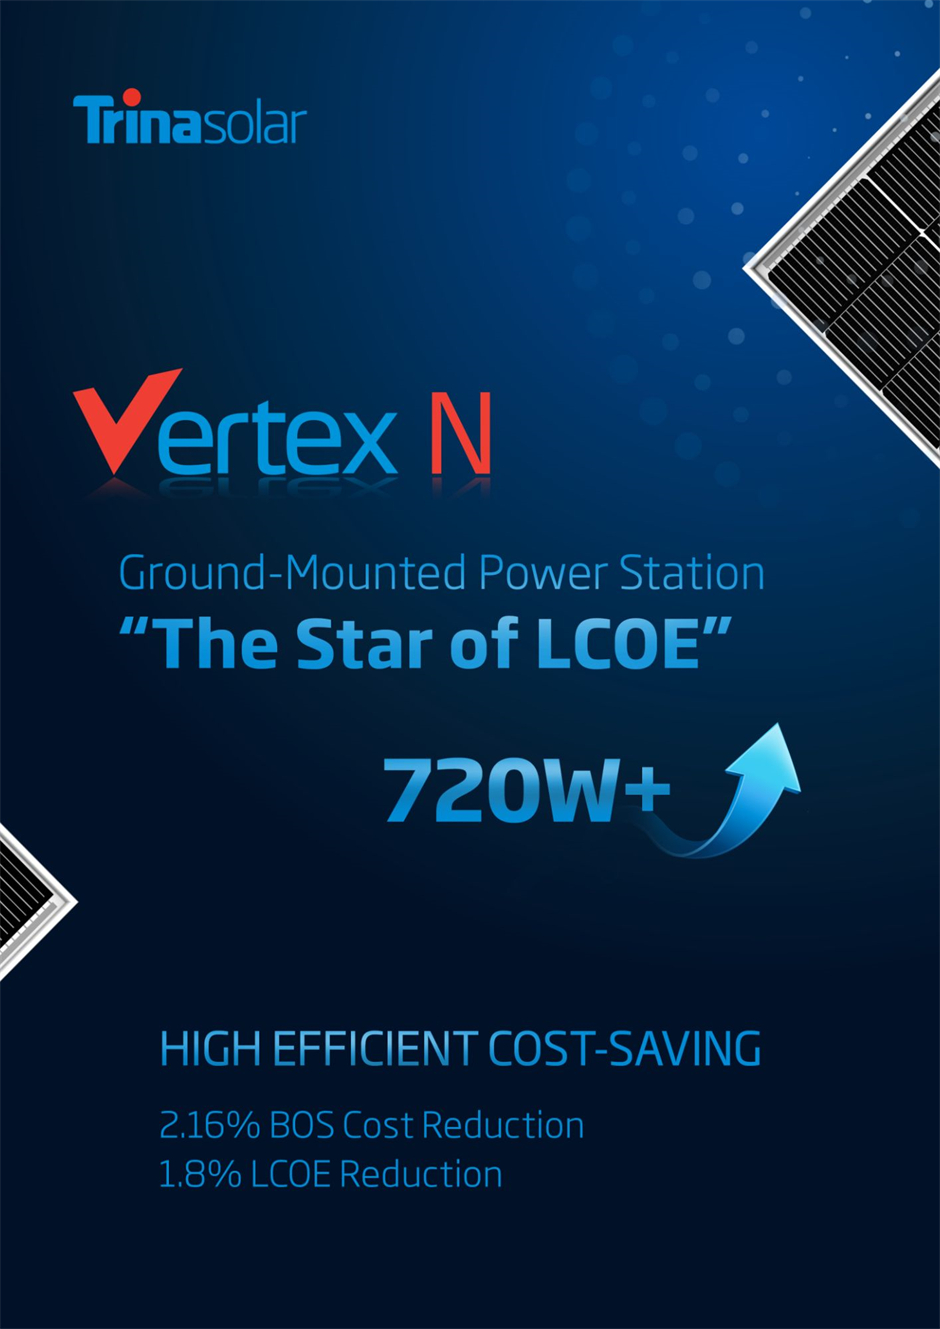 Vertex N NEG21C.20, a bifacial solar panel delivering an ultra-high power output of 720W+, is positioned as The Star of LCOE for Ground-Mounted Power Stations.